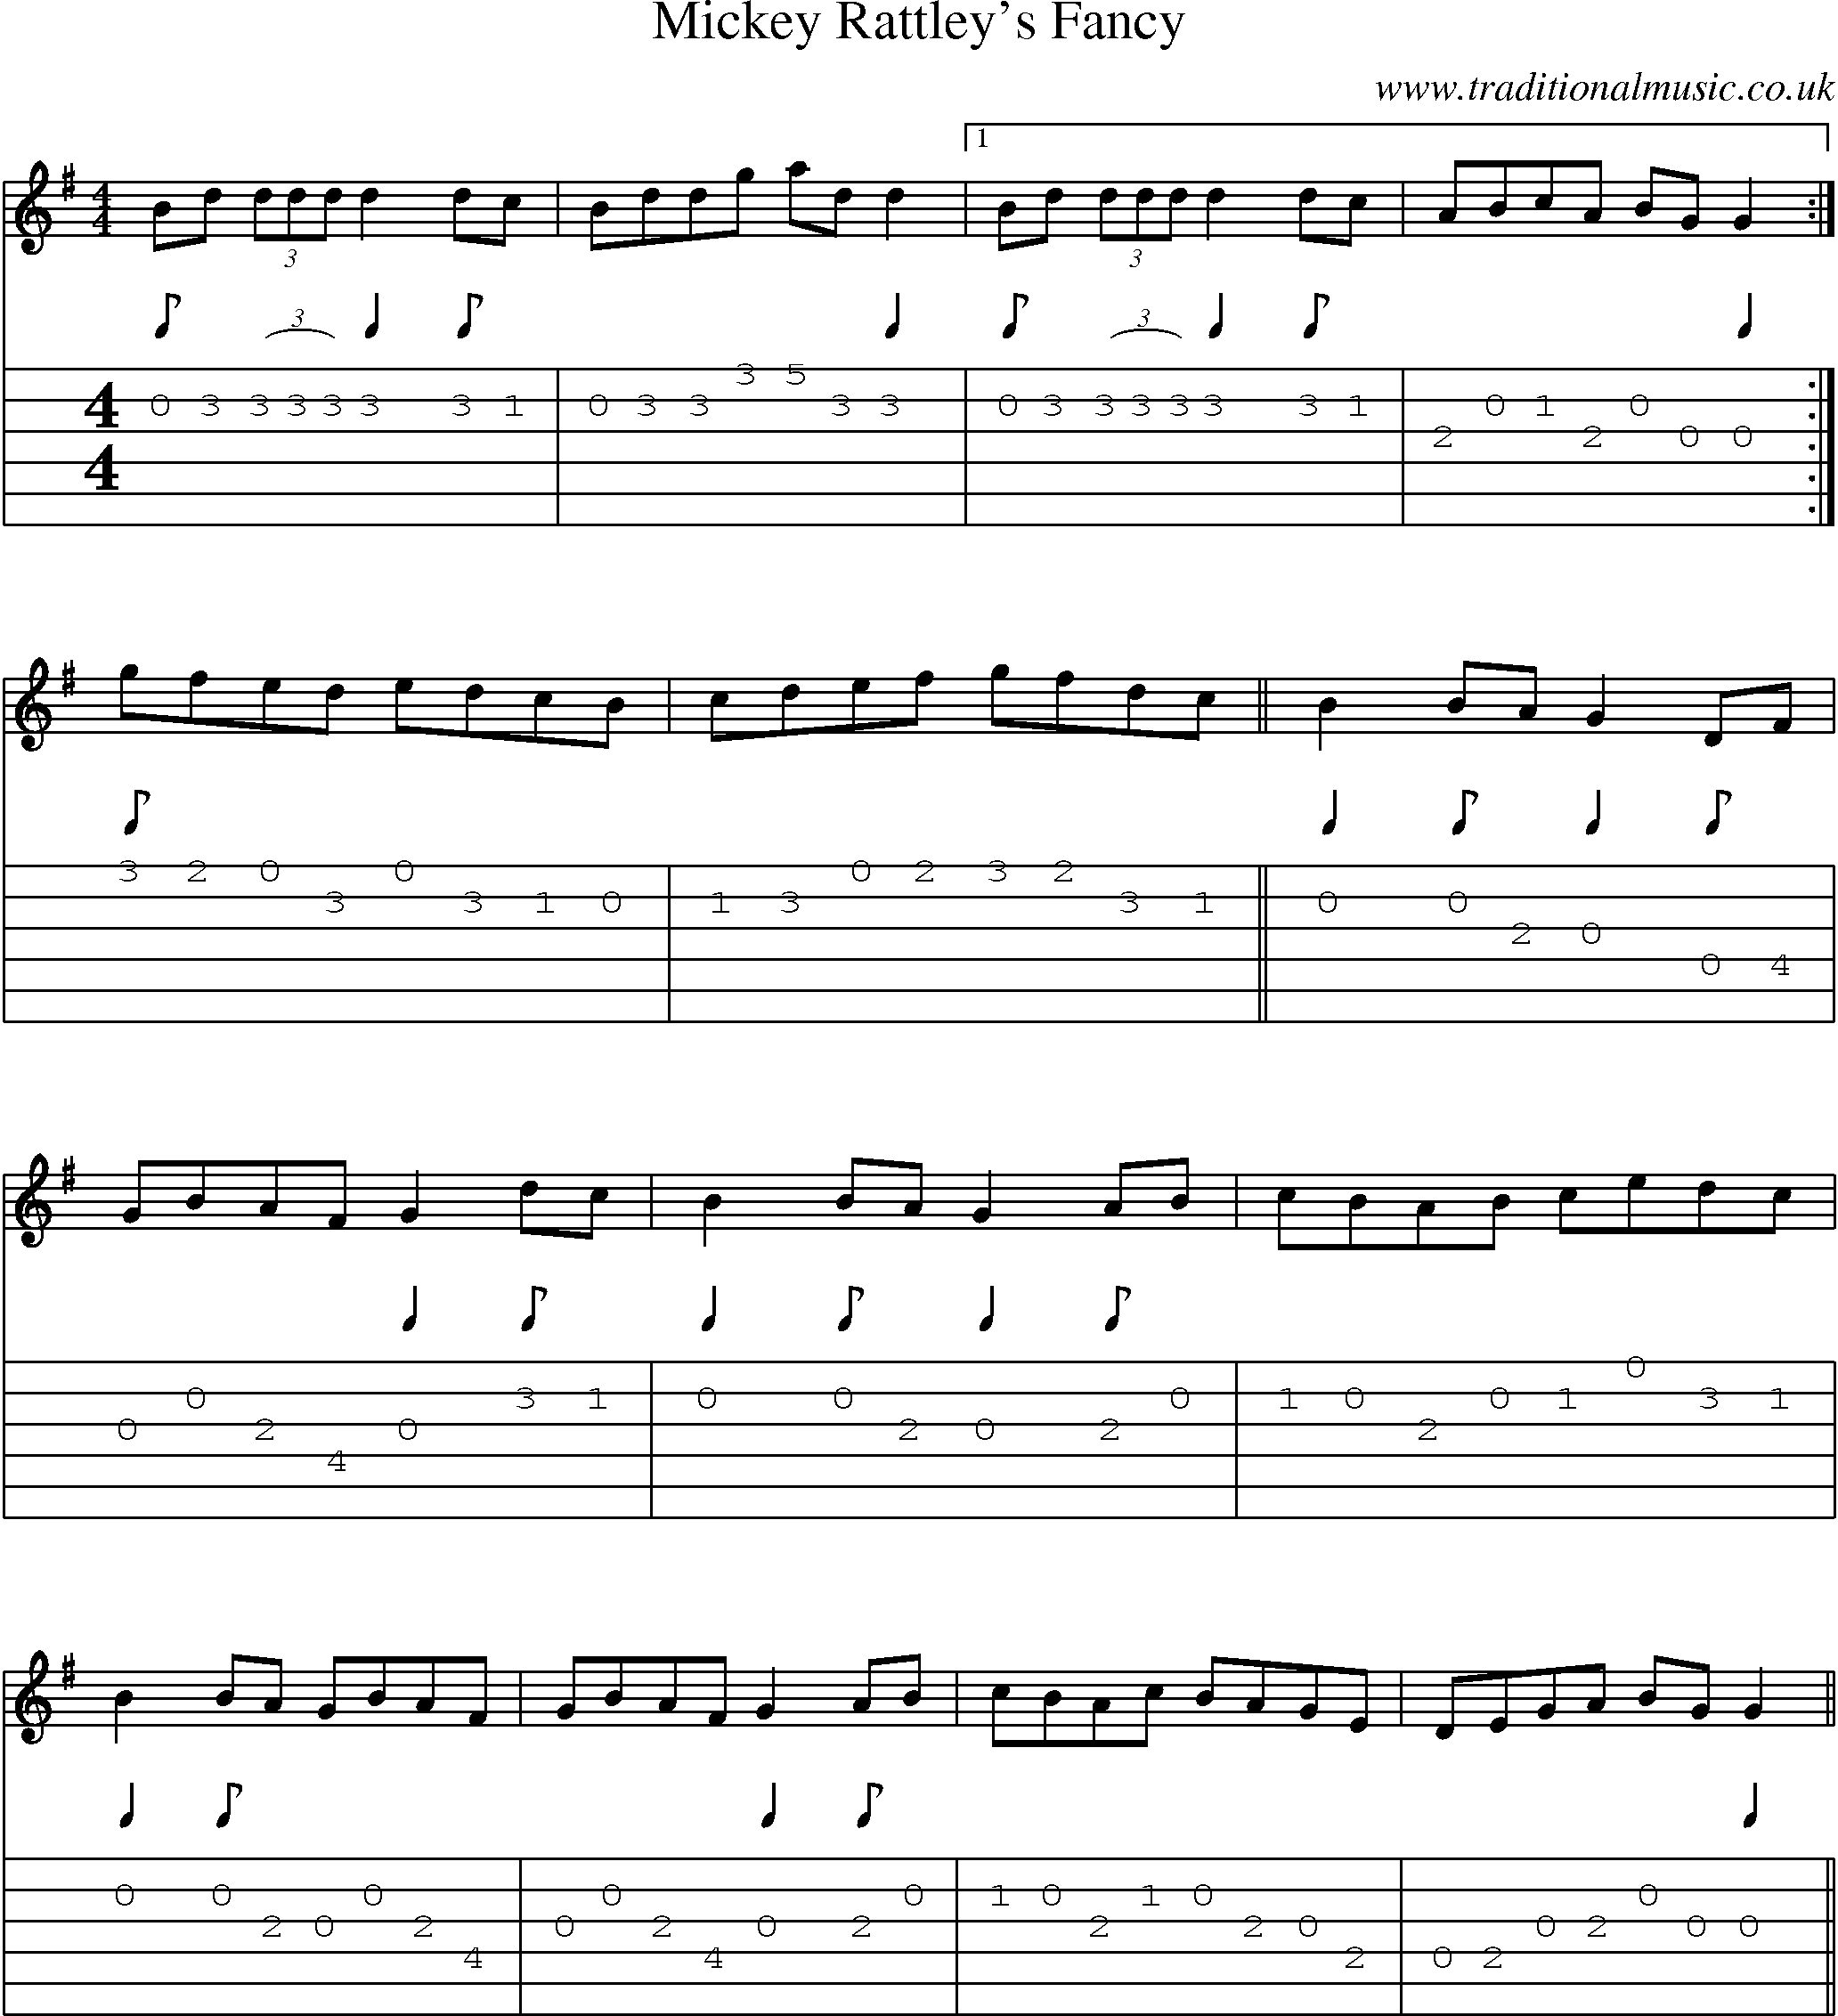 Music Score and Guitar Tabs for Mickey Rattleys Fancy